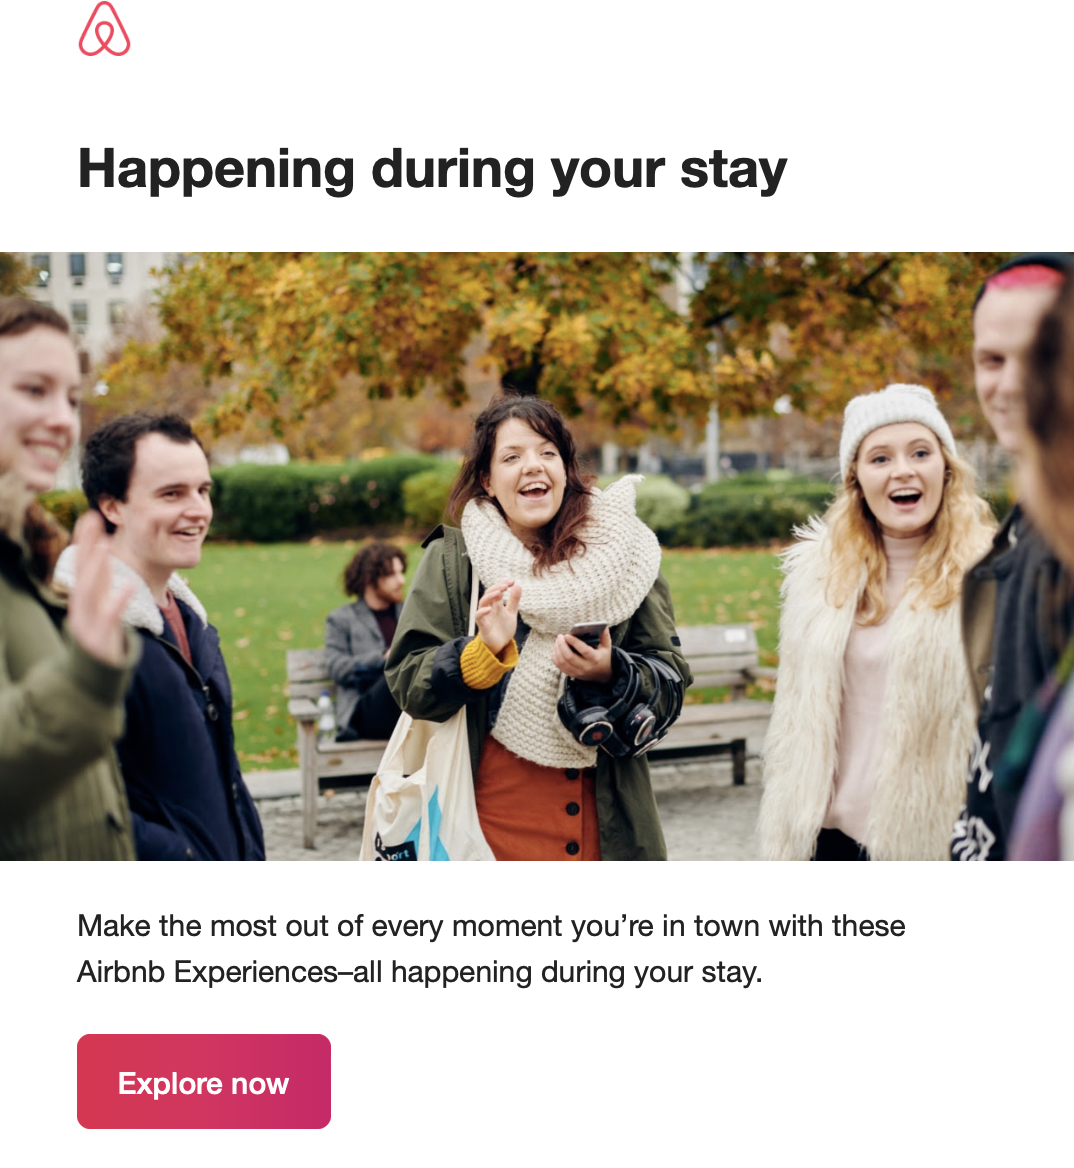 Email marketing example from Airbnb showing events happening during your stay